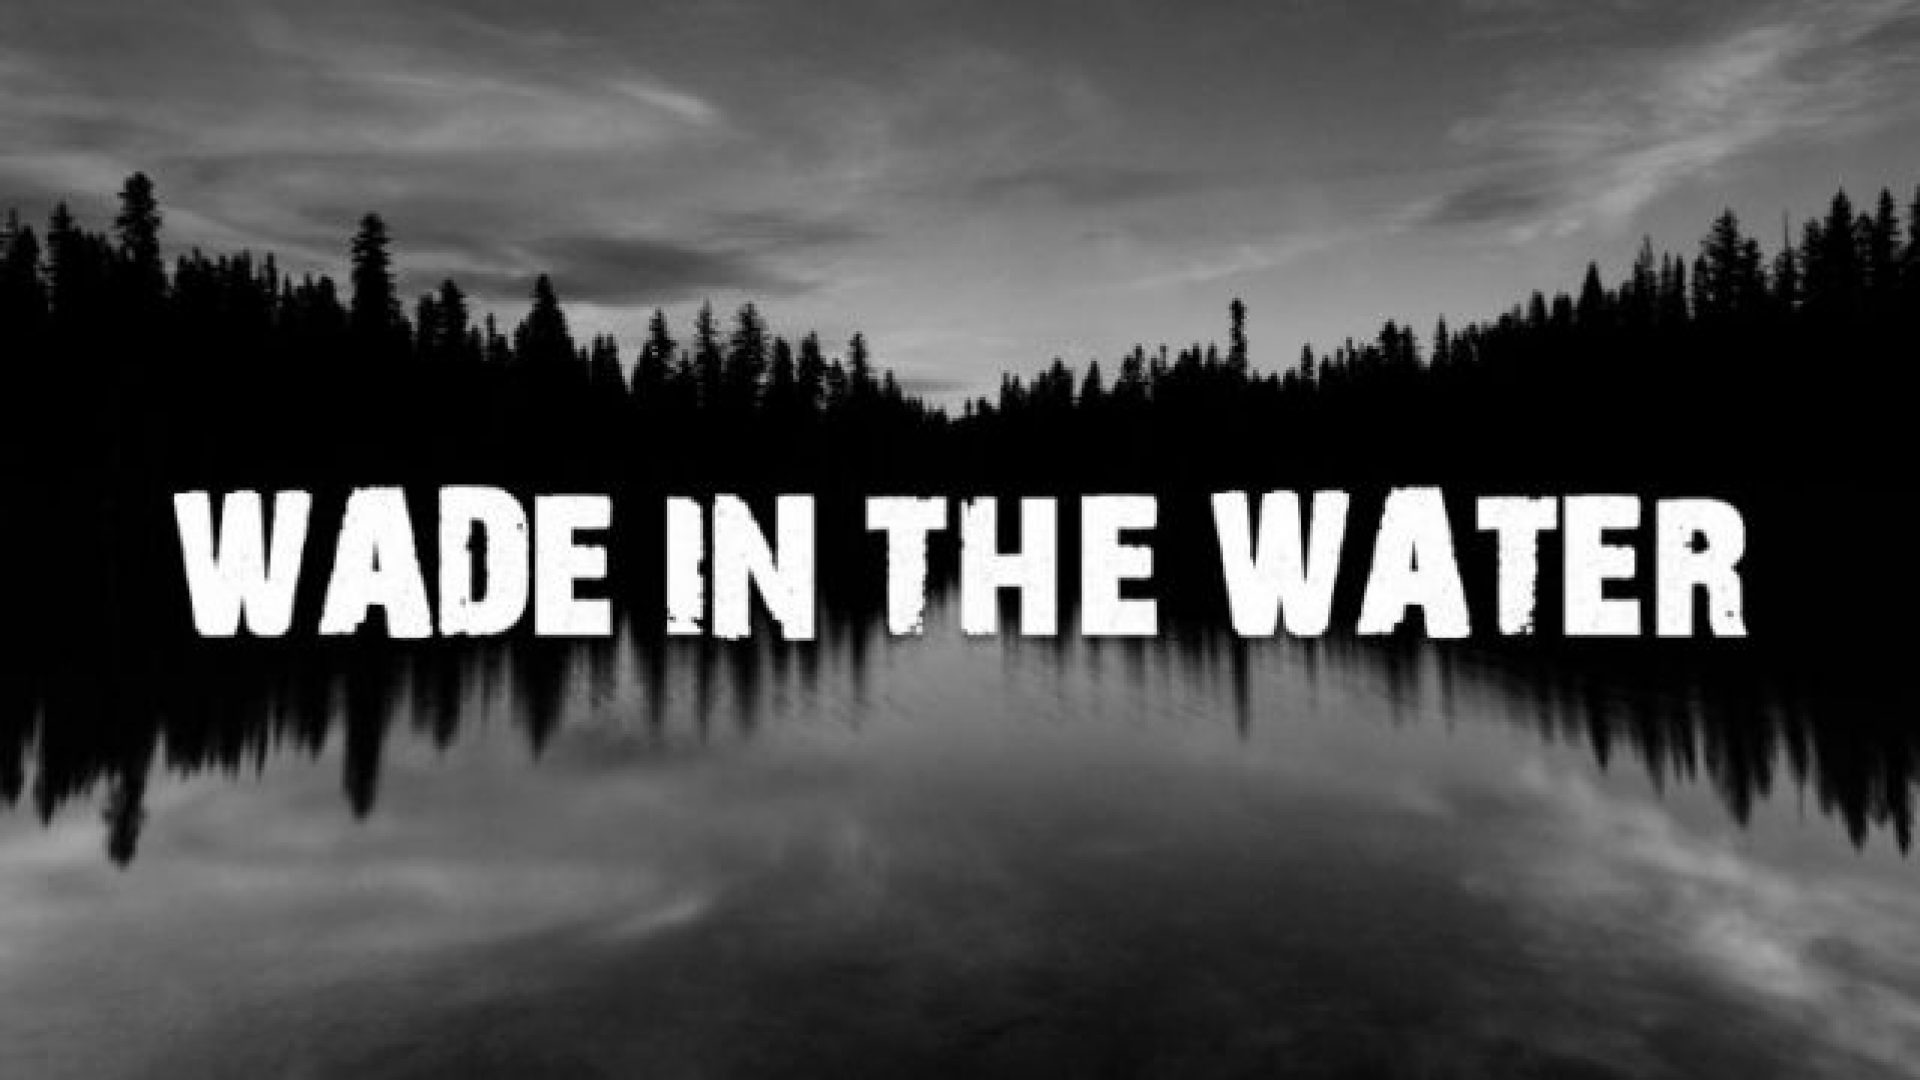 WADE INTO THE WATERS